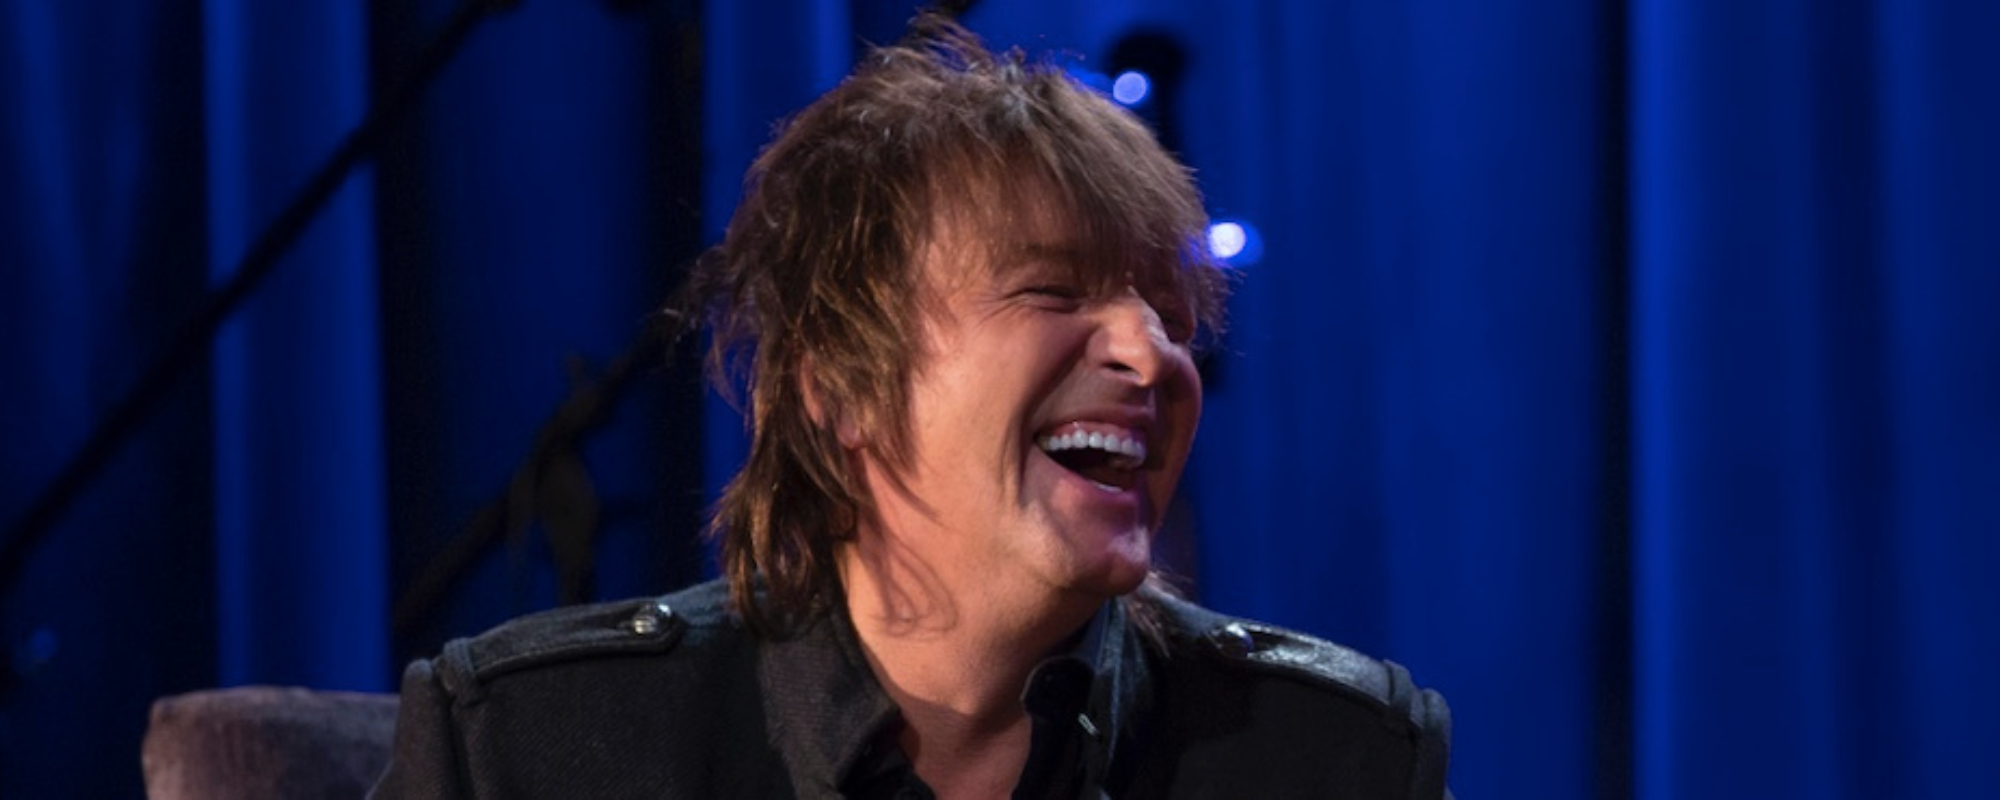 Richie Sambora Reveals His Reaction to Being Invited to Play on Dolly Parton’s Latest Album ‘Rockstar’